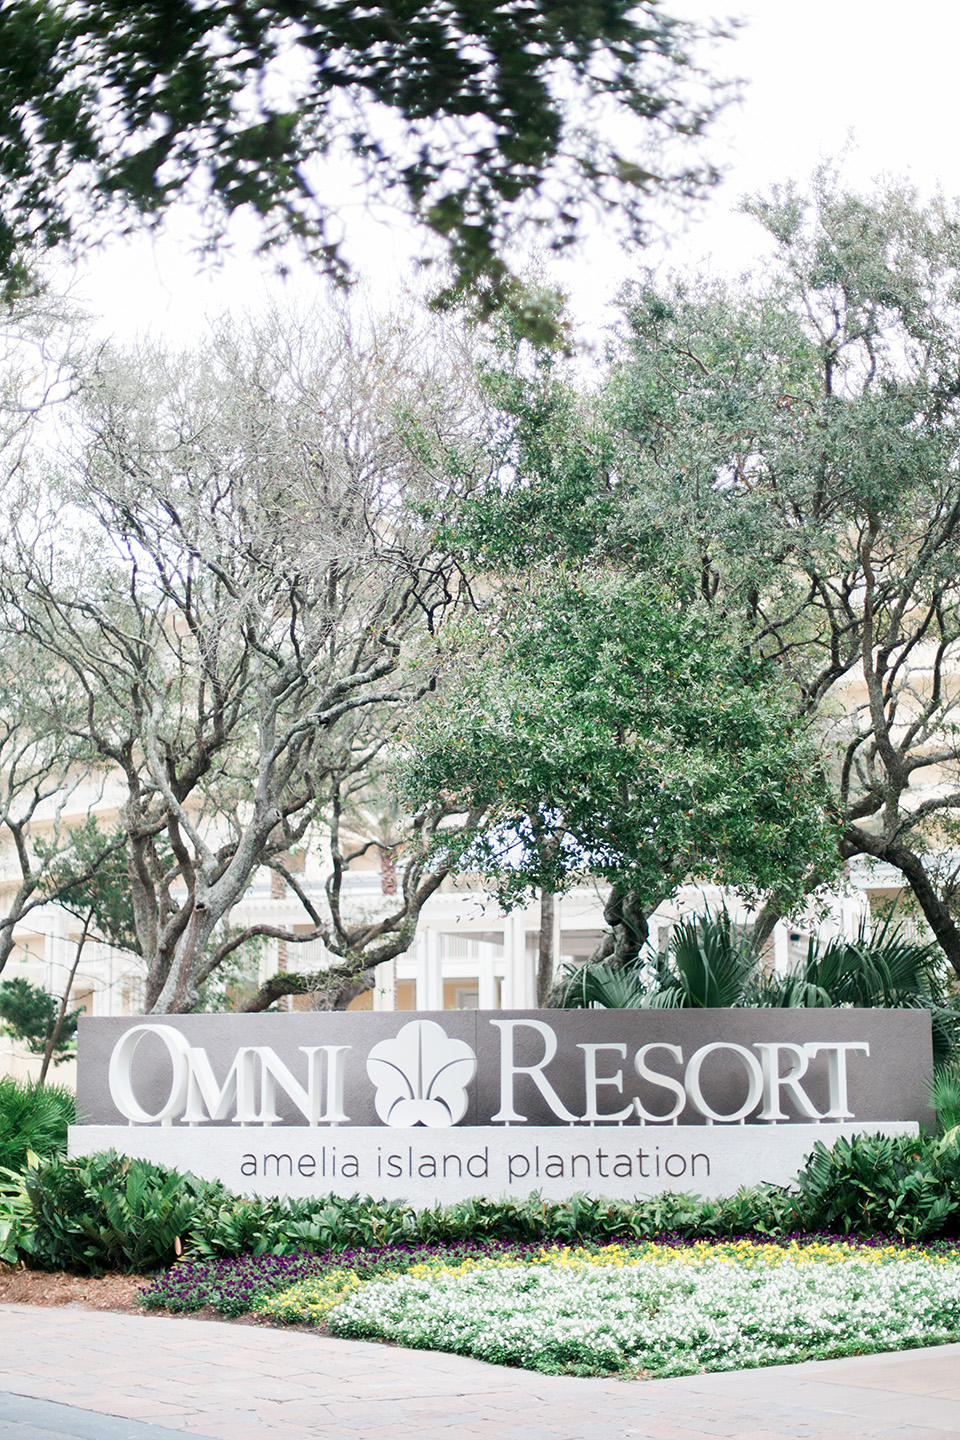 This is a picture of the entrance to the Omni Amelia Island Plantation Resort.  There is a sign with large letters, "Omni Resorts" with a flower in the middle of the sign.